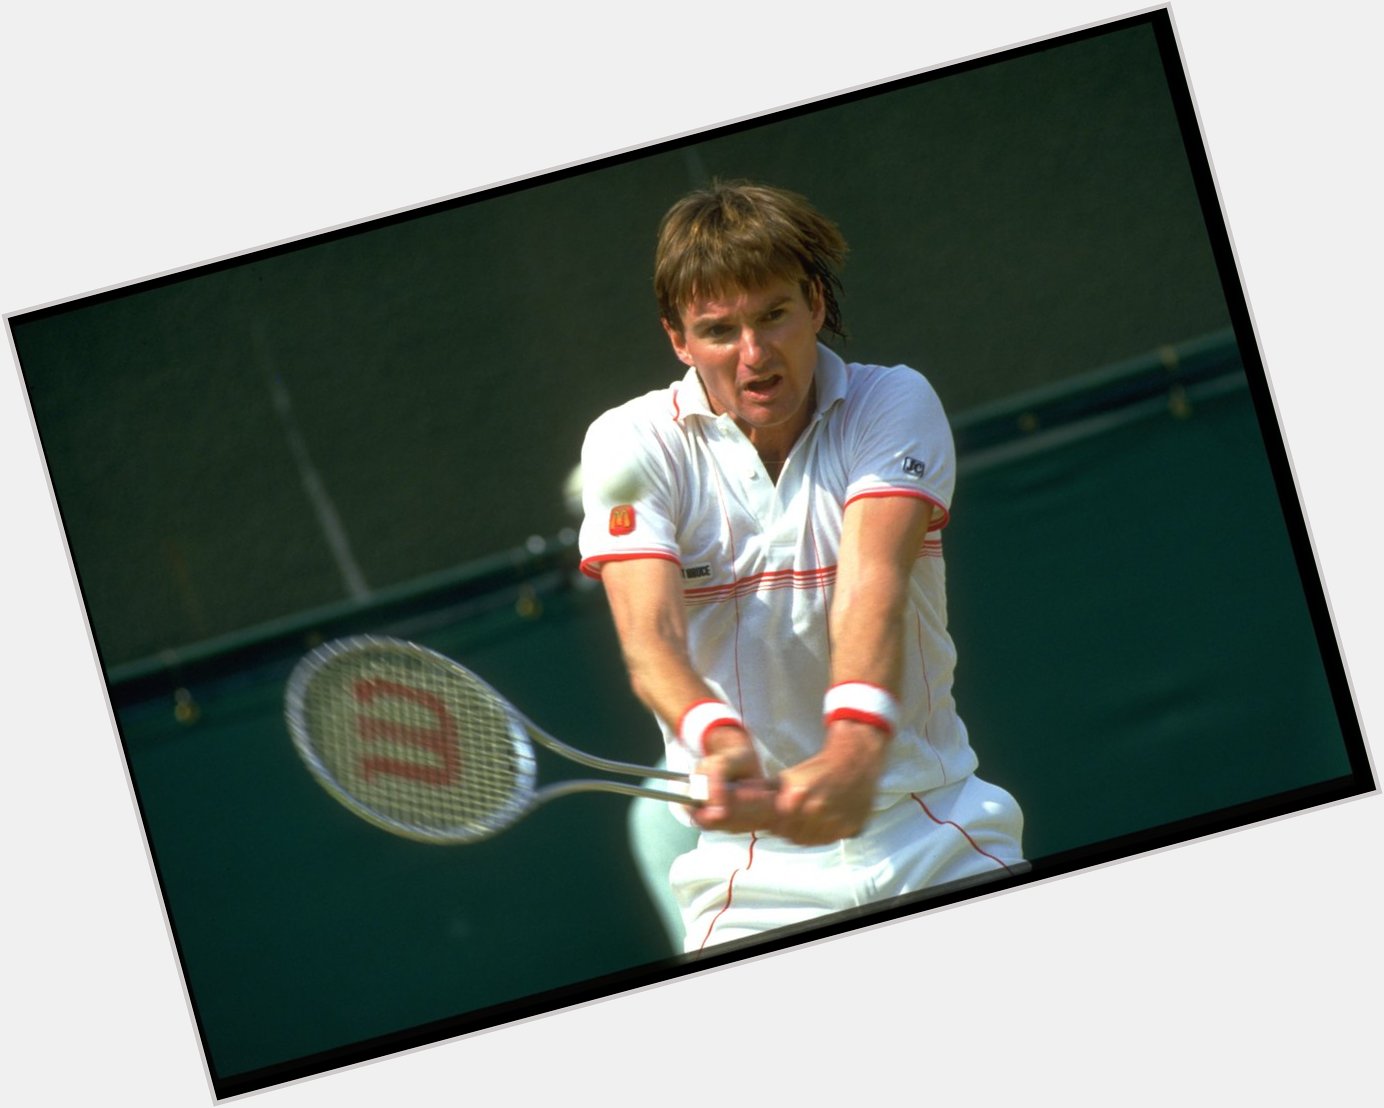 September 2, 2020
Happy birthday to American tennis player Jimmy Connors 68 years old. 